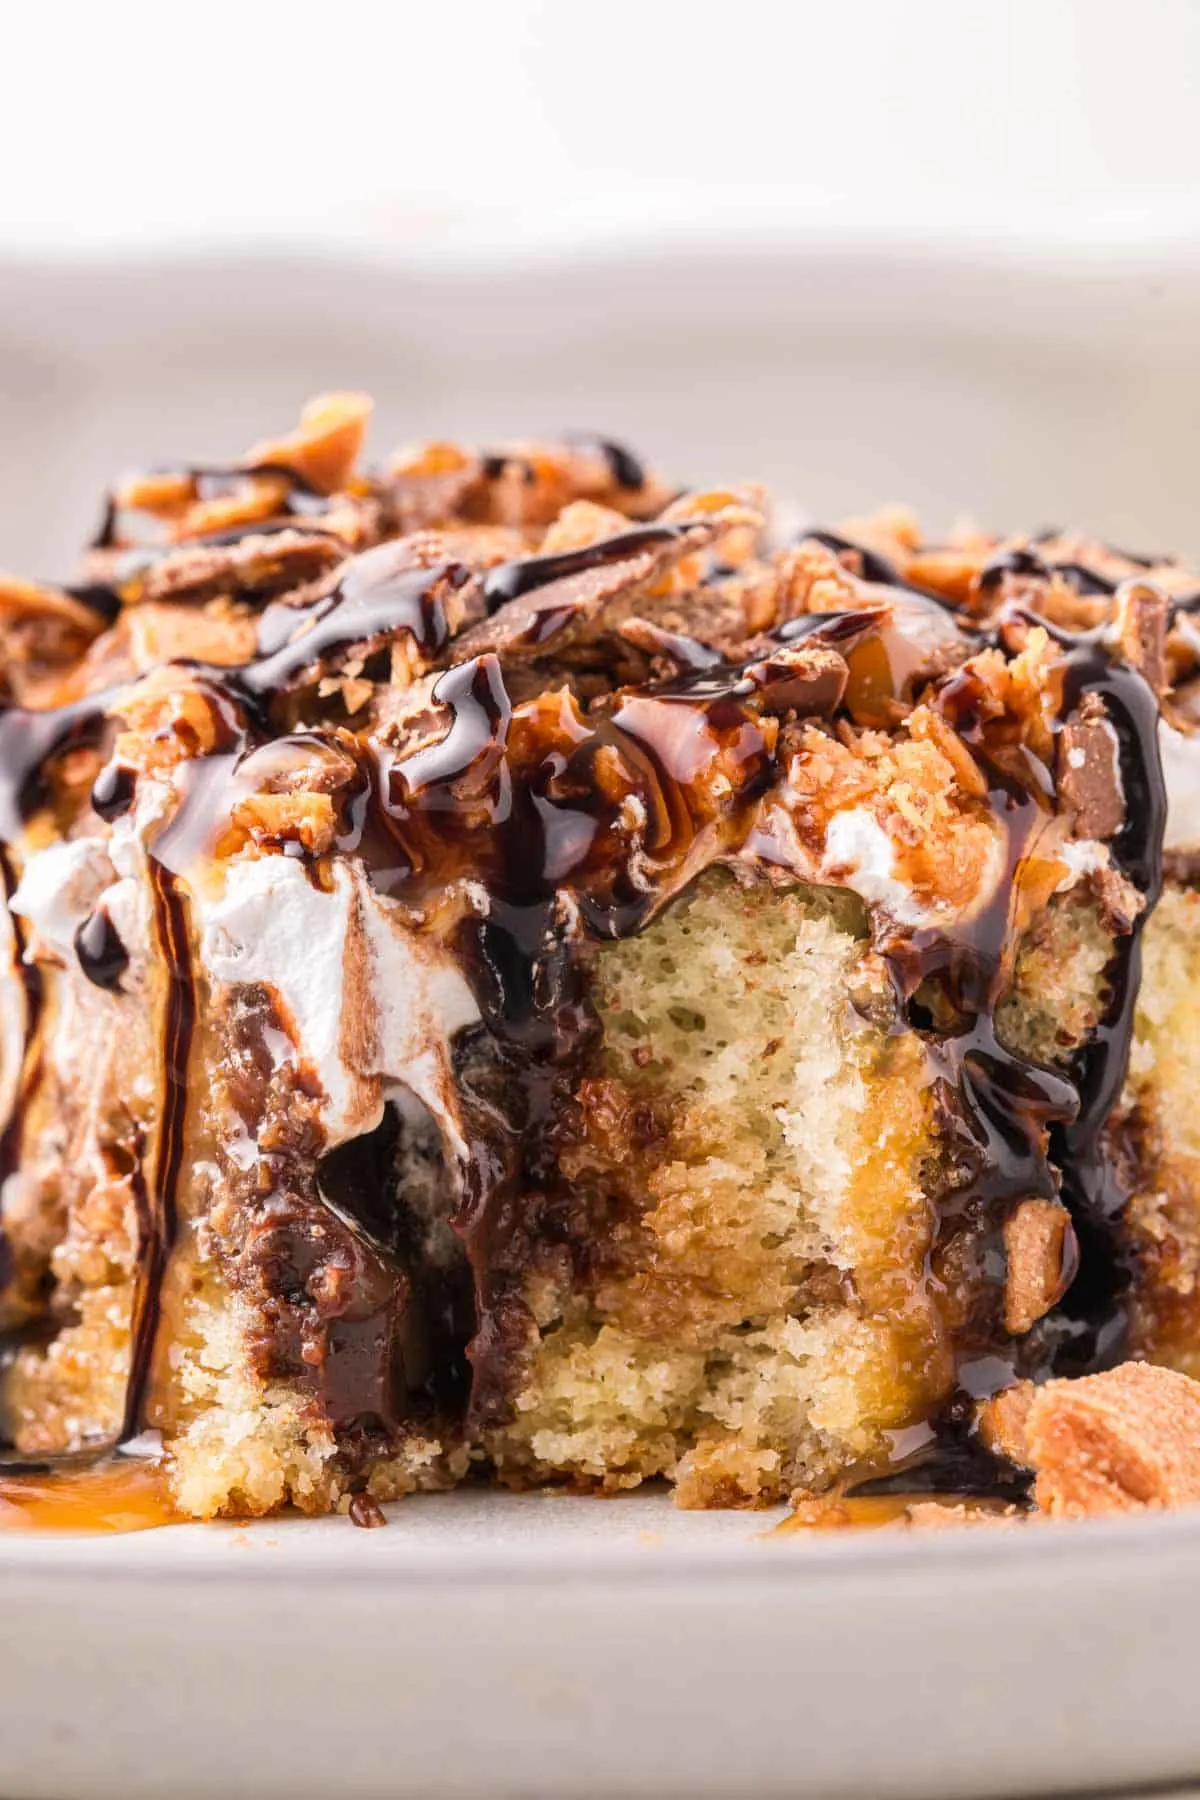 Butterfinger Poke Cake is a decadent dessert starting with a golden cake filled with chocolate and caramel sauce and topped with whipped topping and chopped Butterfinger chocolate bars.